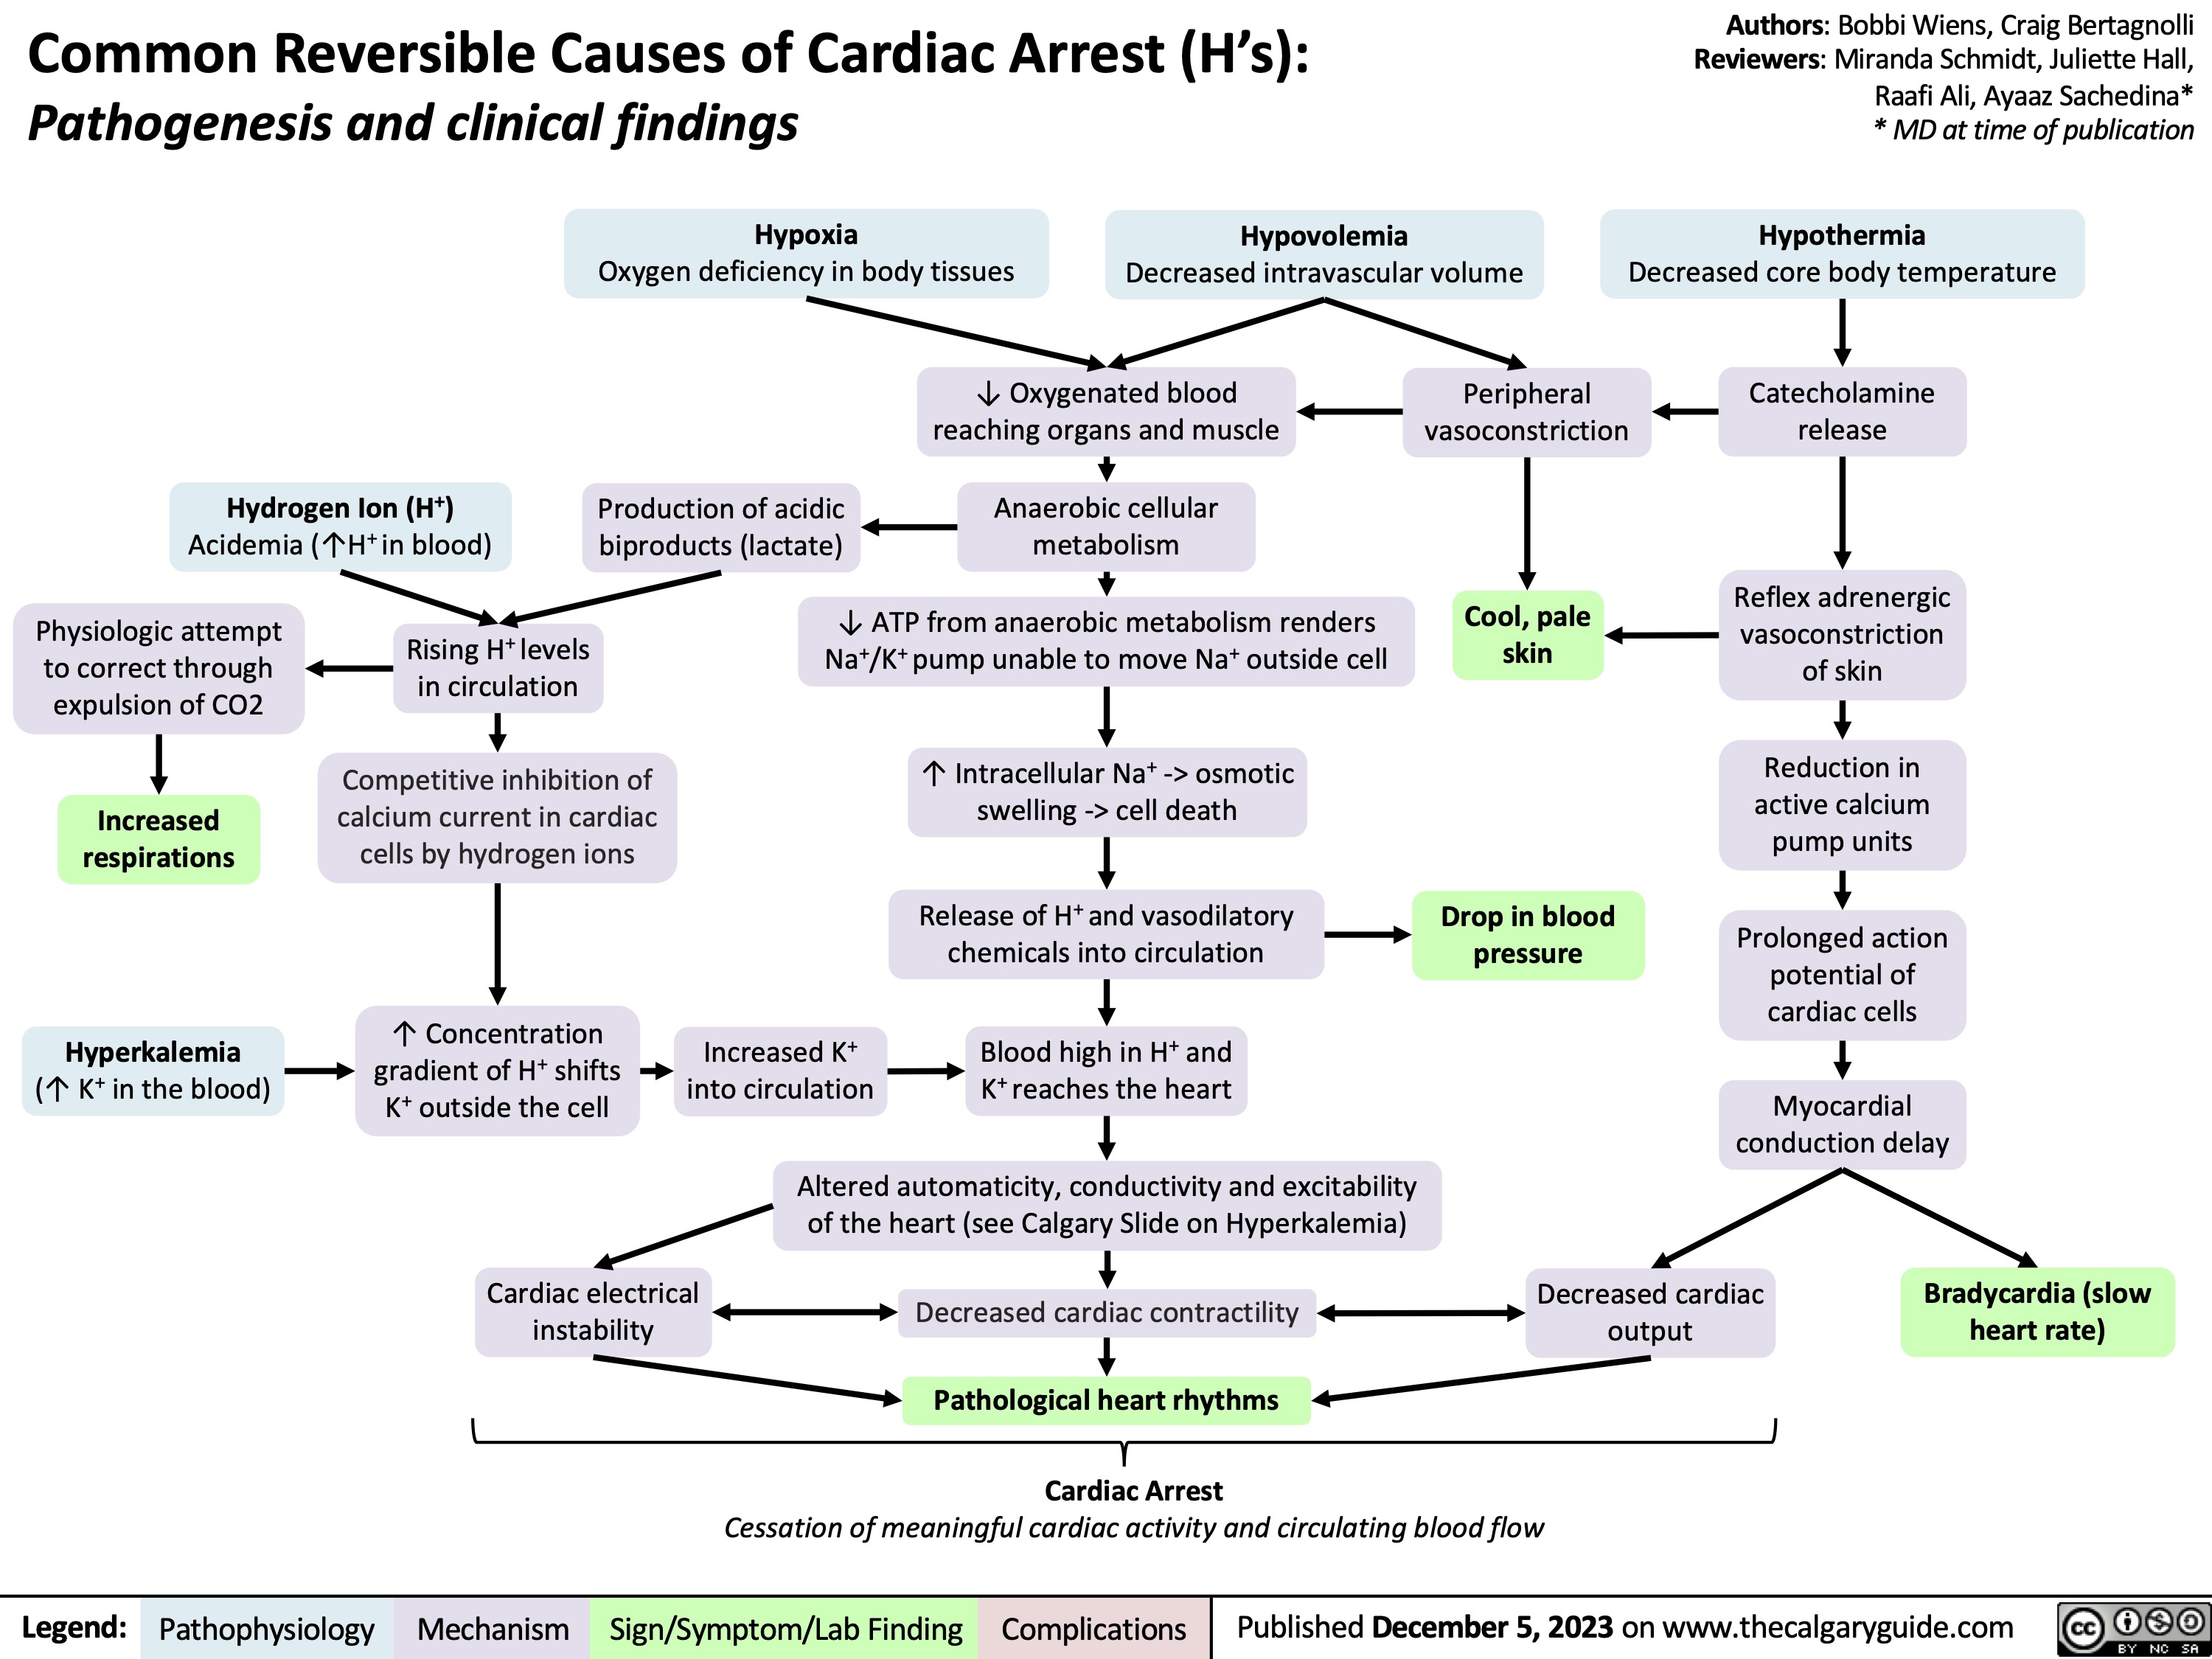 Common Reversible Causes of Cardiac Arrest (H’s)